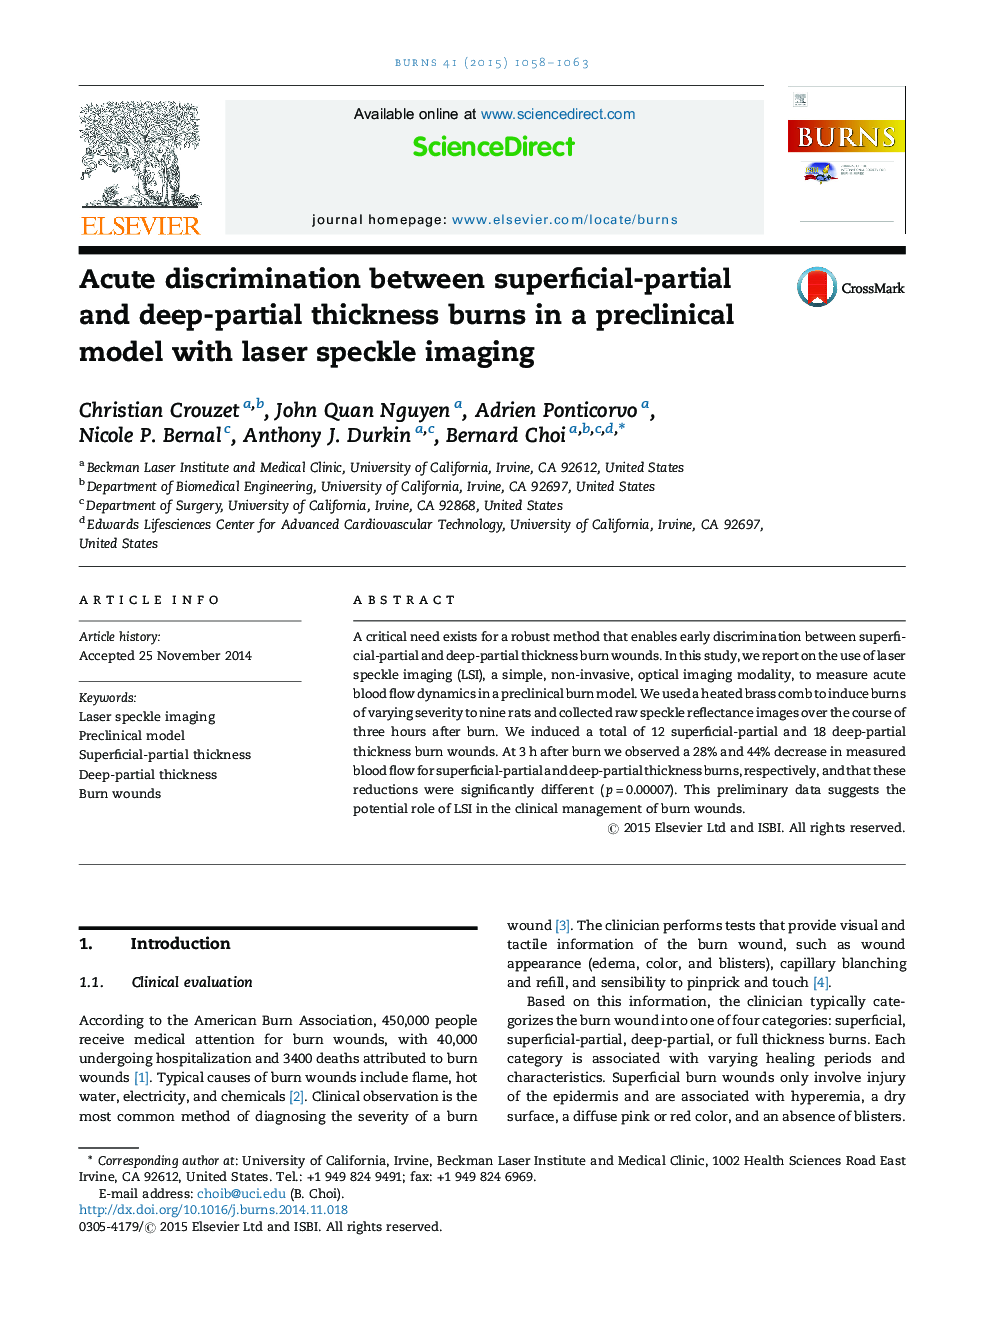 Acute discrimination between superficial-partial and deep-partial thickness burns in a preclinical model with laser speckle imaging